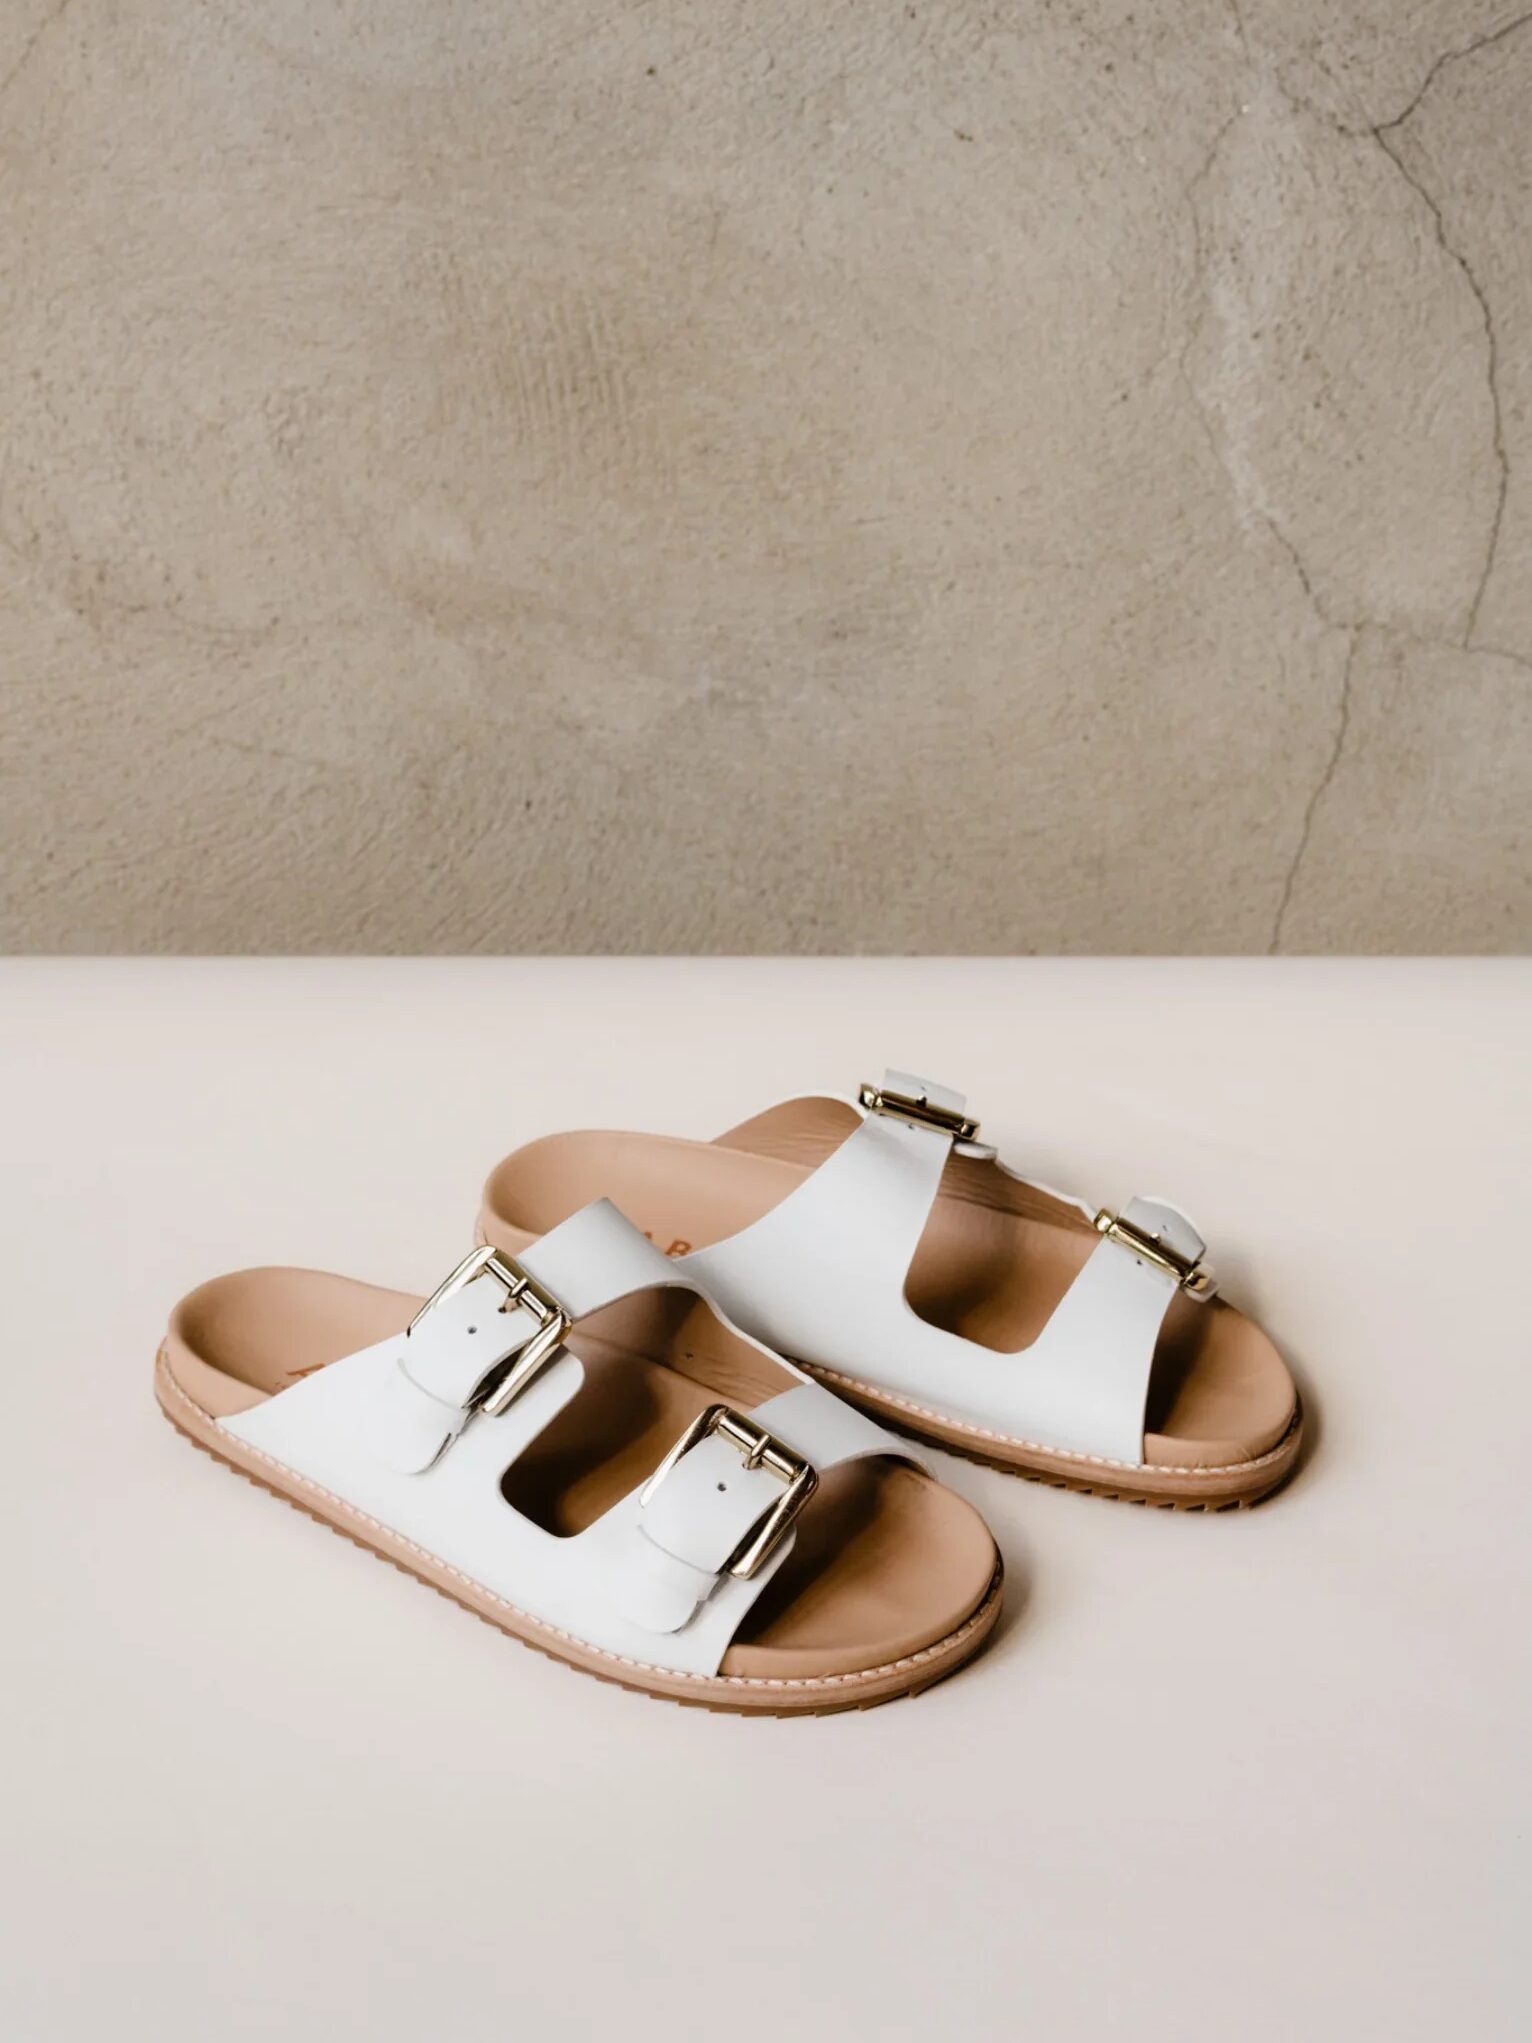 A pair of white sandals with buckle details on a beige surface against a textured grey wall.